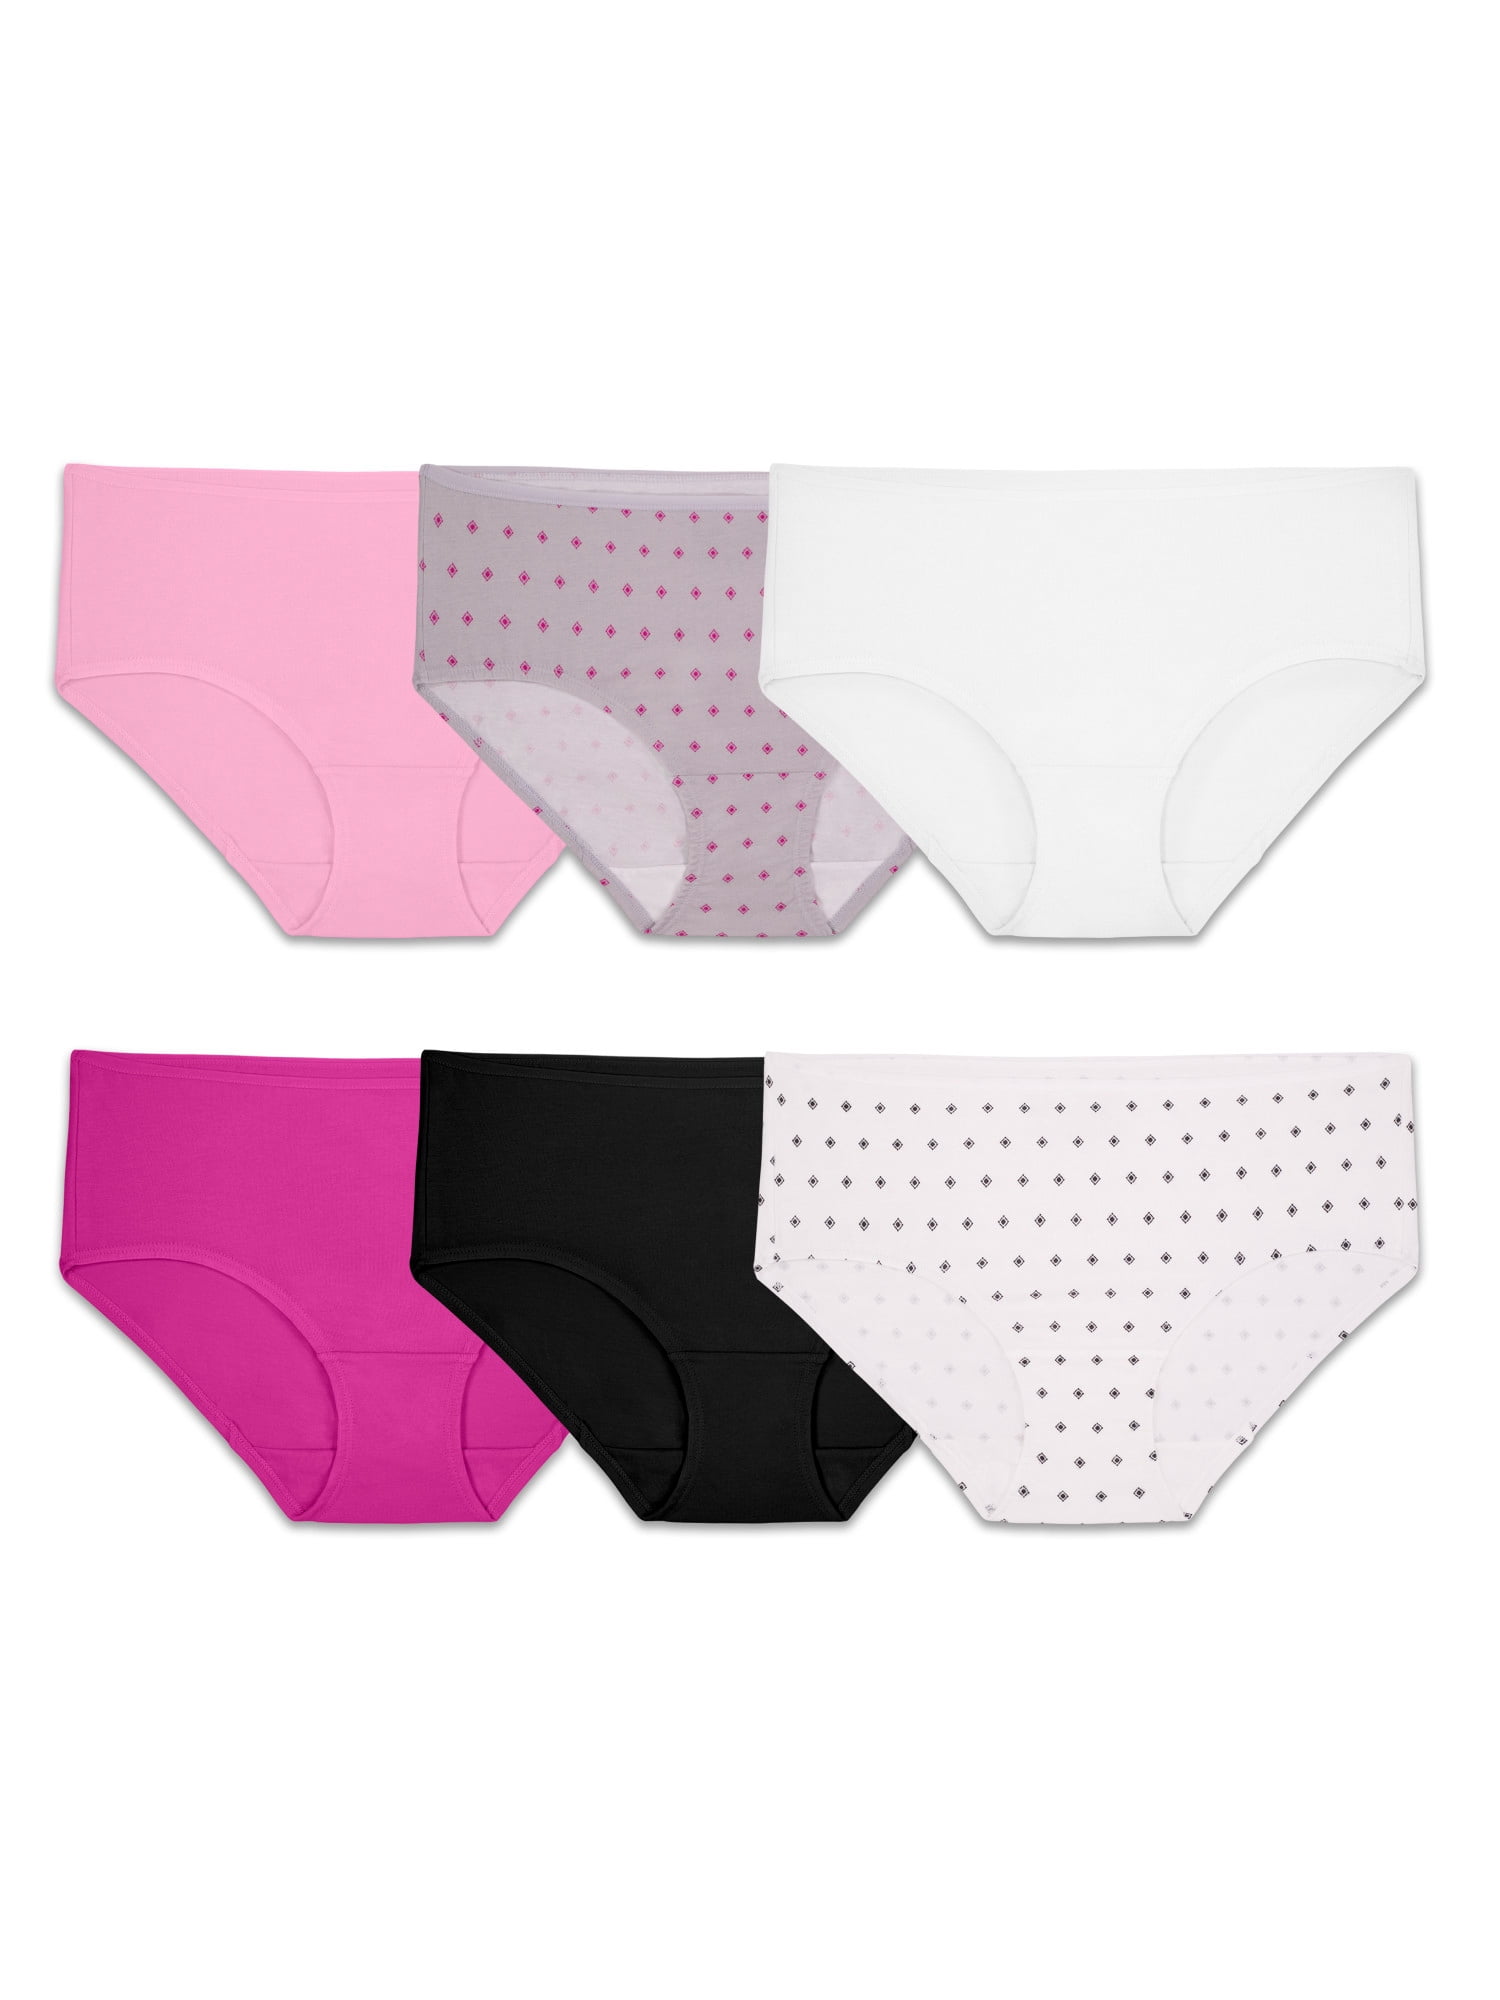 Fruit of the Loom Women's Cotton Stretch Panties 